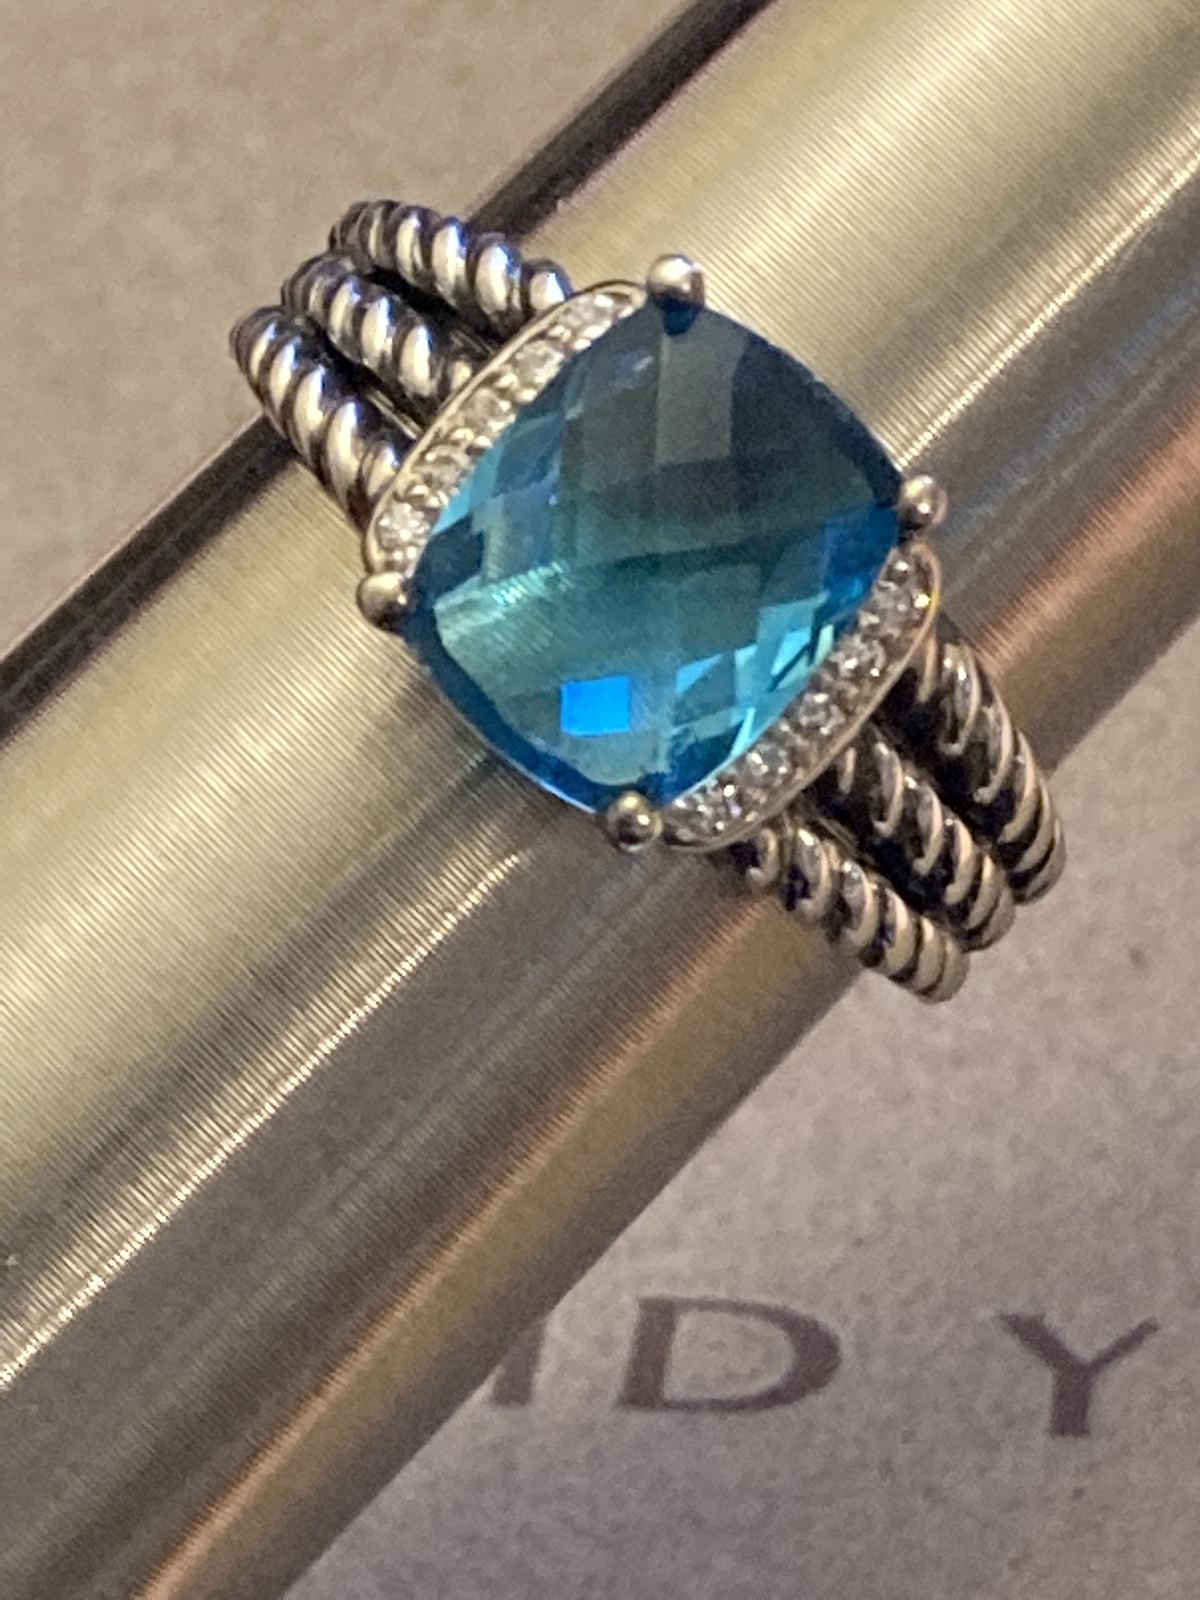 Primary image for Pre Owned David Yurman Petite Wheaton Blue Topaz  Ring 10mmx8mm Size 6